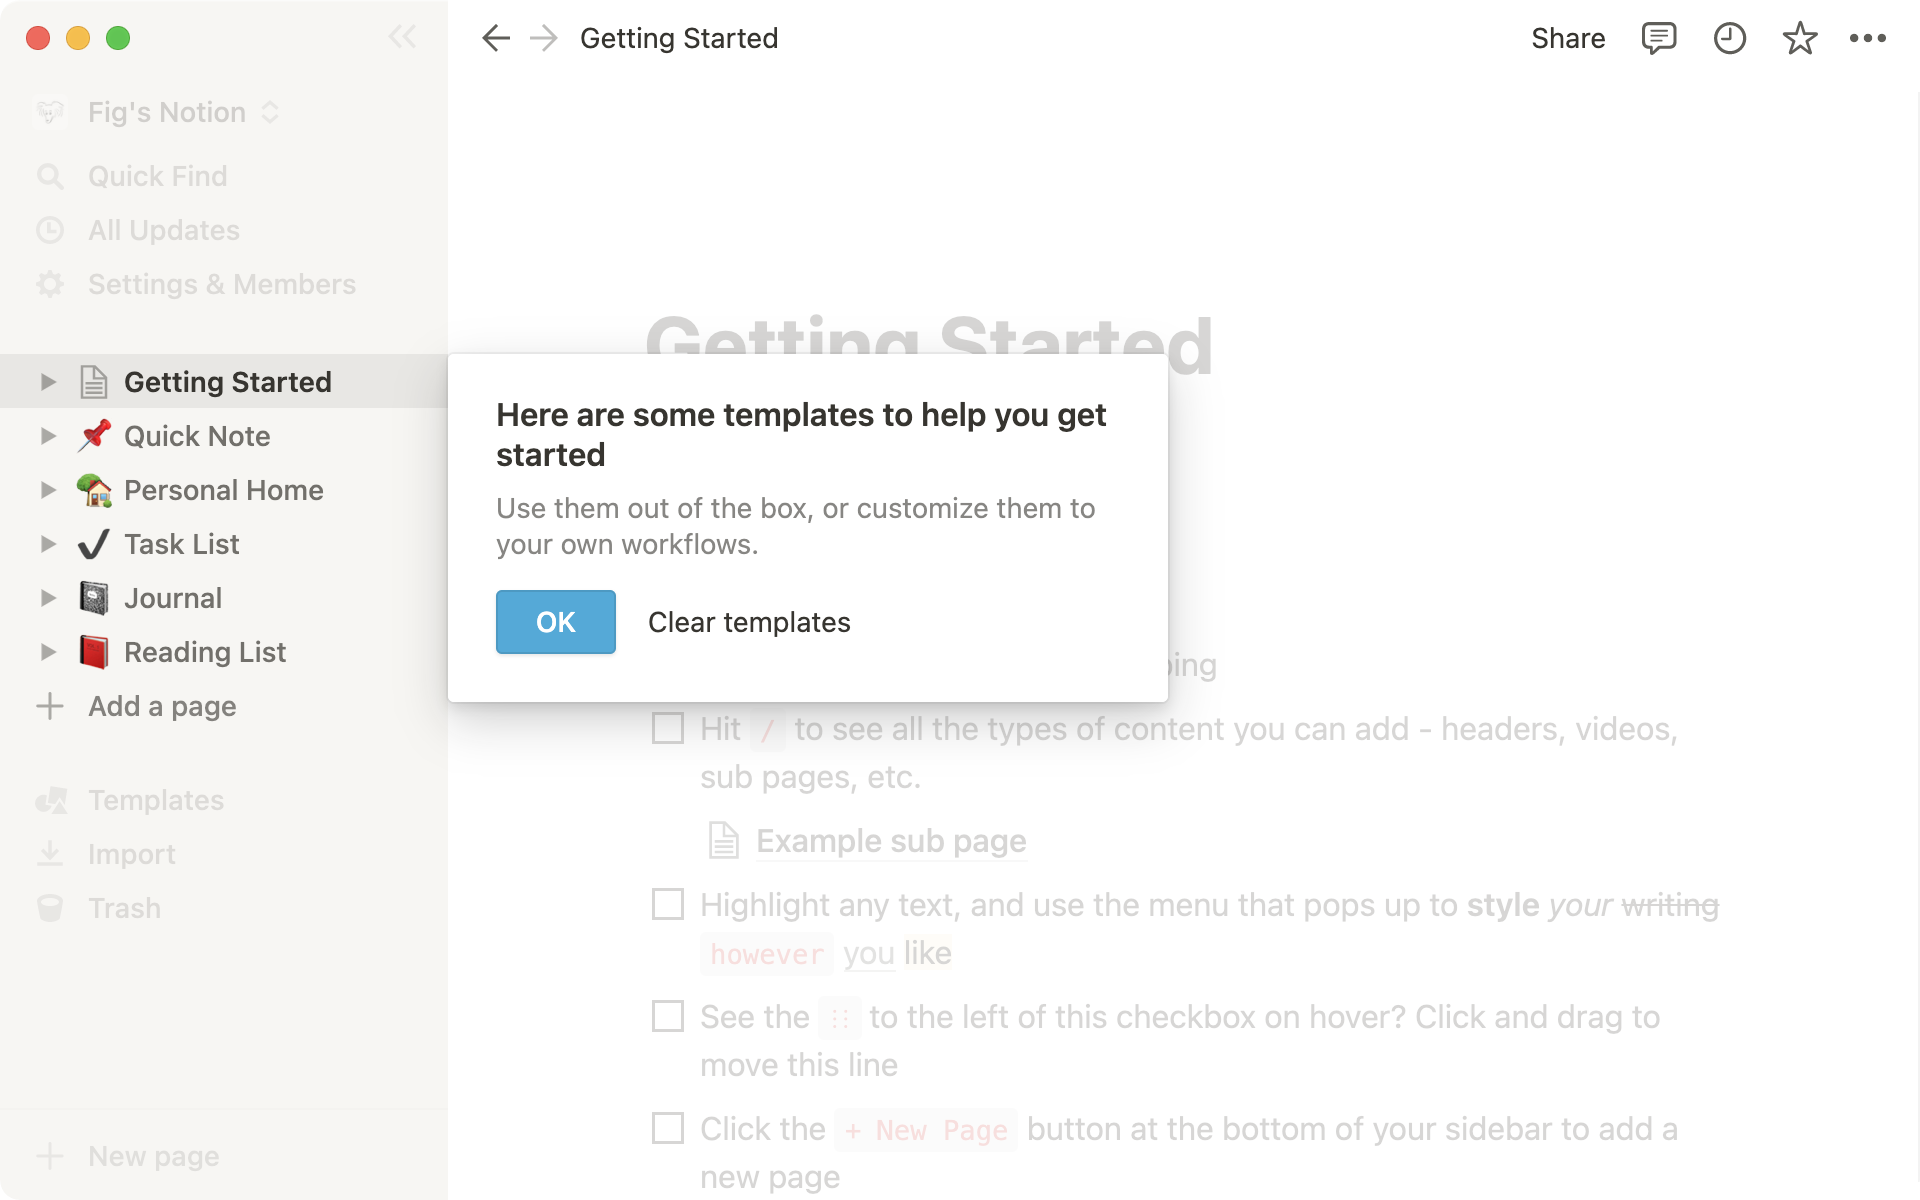 Onboarding templates